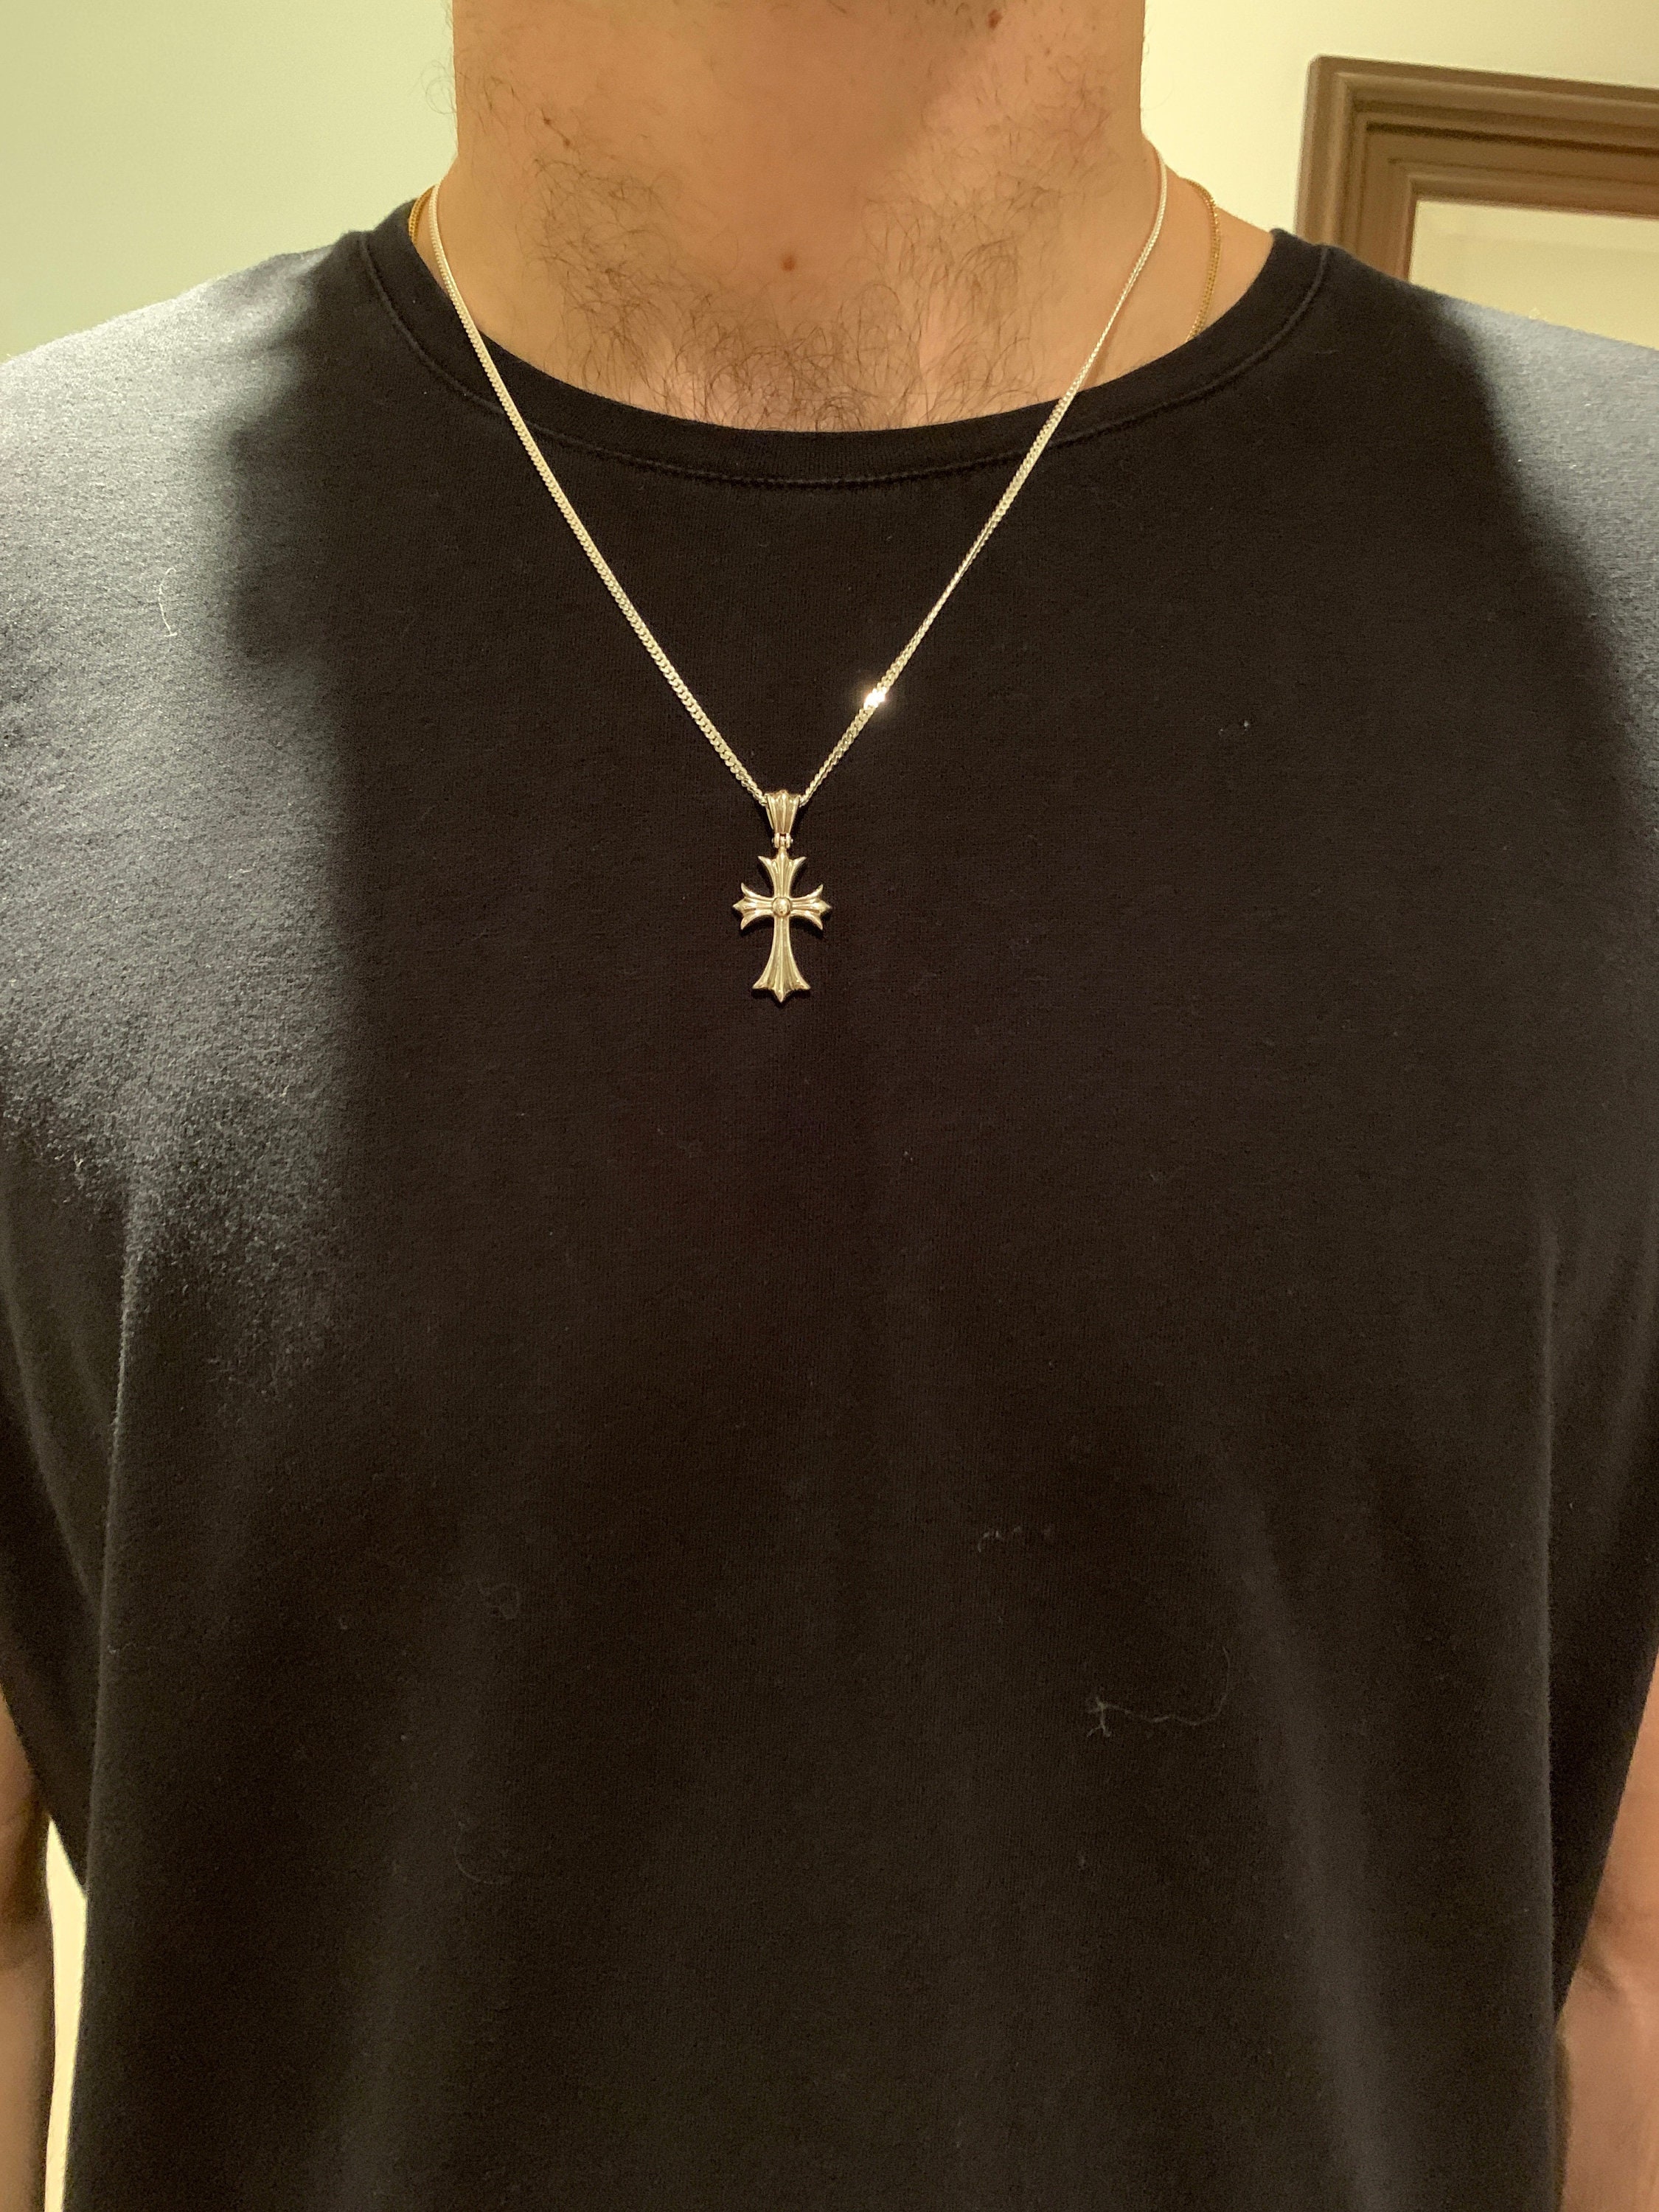 Chrome Hearts Inspired Cross Necklace Pendant Chain in Silver | Etsy